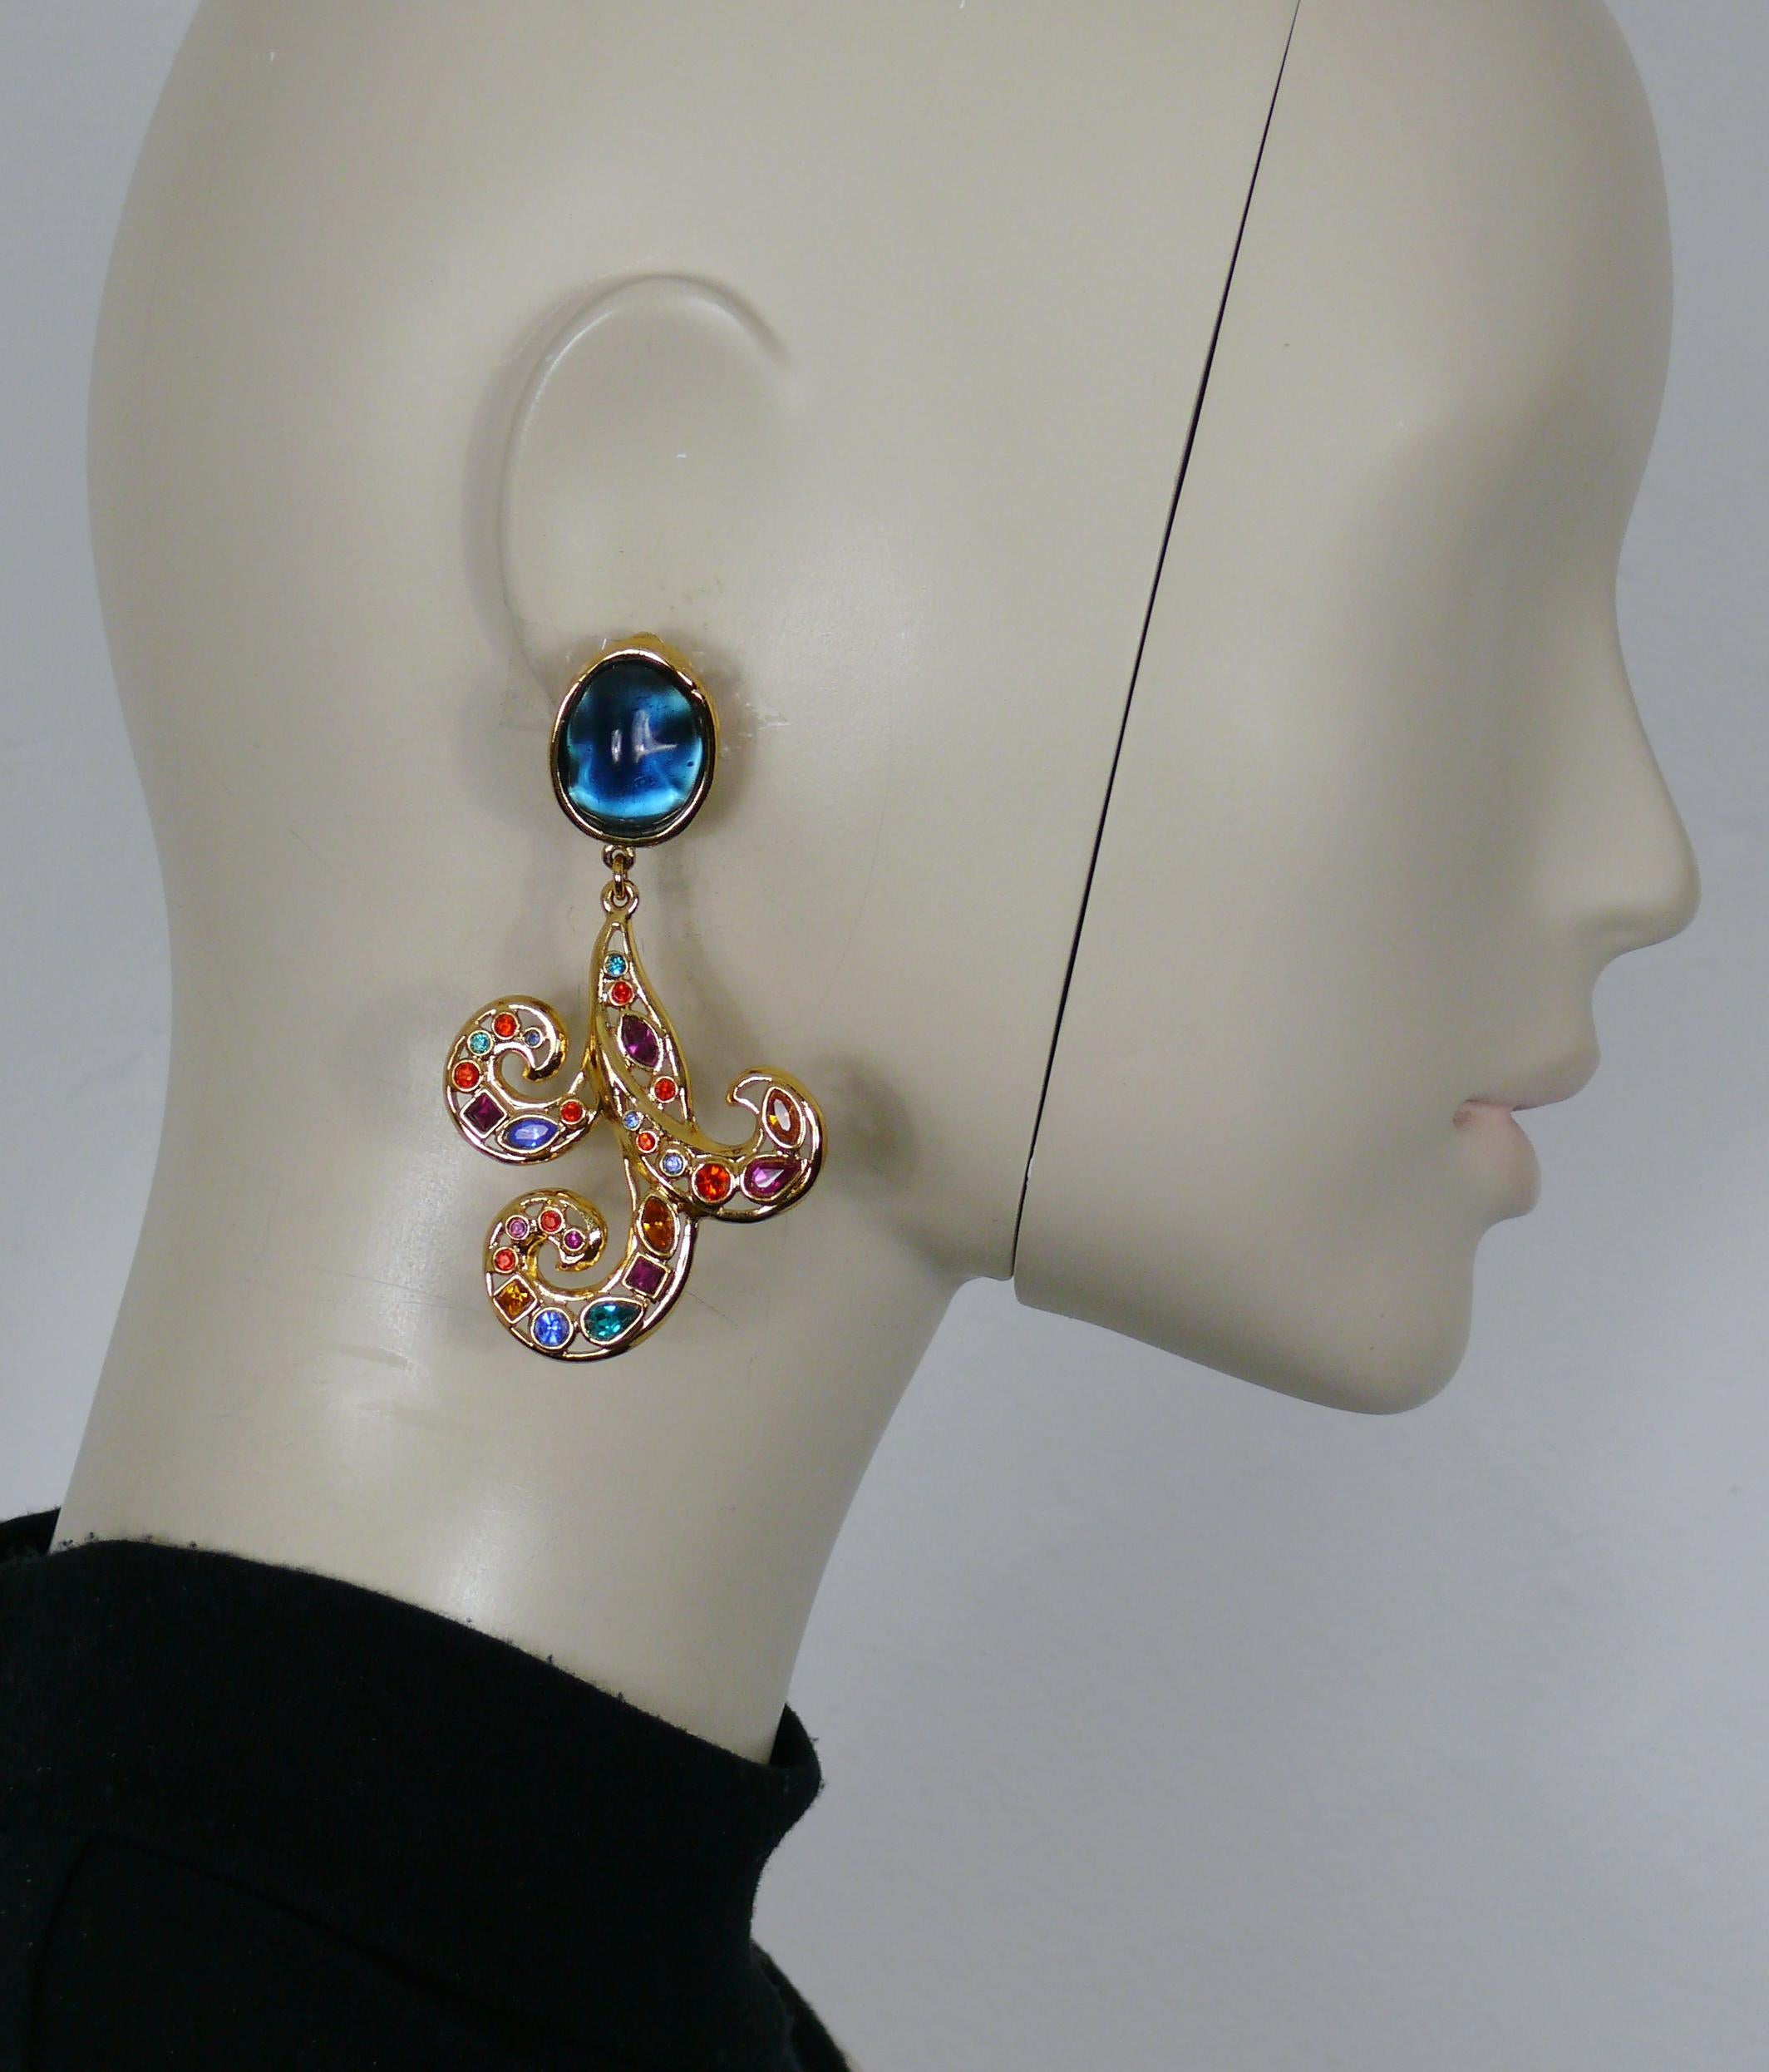 YVES SAINT LAURENT vintage gold tone dangling earrings (clip on) featuring a blue resin cabochon top and an openwork arabesque with multicolored crystal embellishement.

Embossed YSL Made in France.

Indicative measurements : max. height 8.2 cm